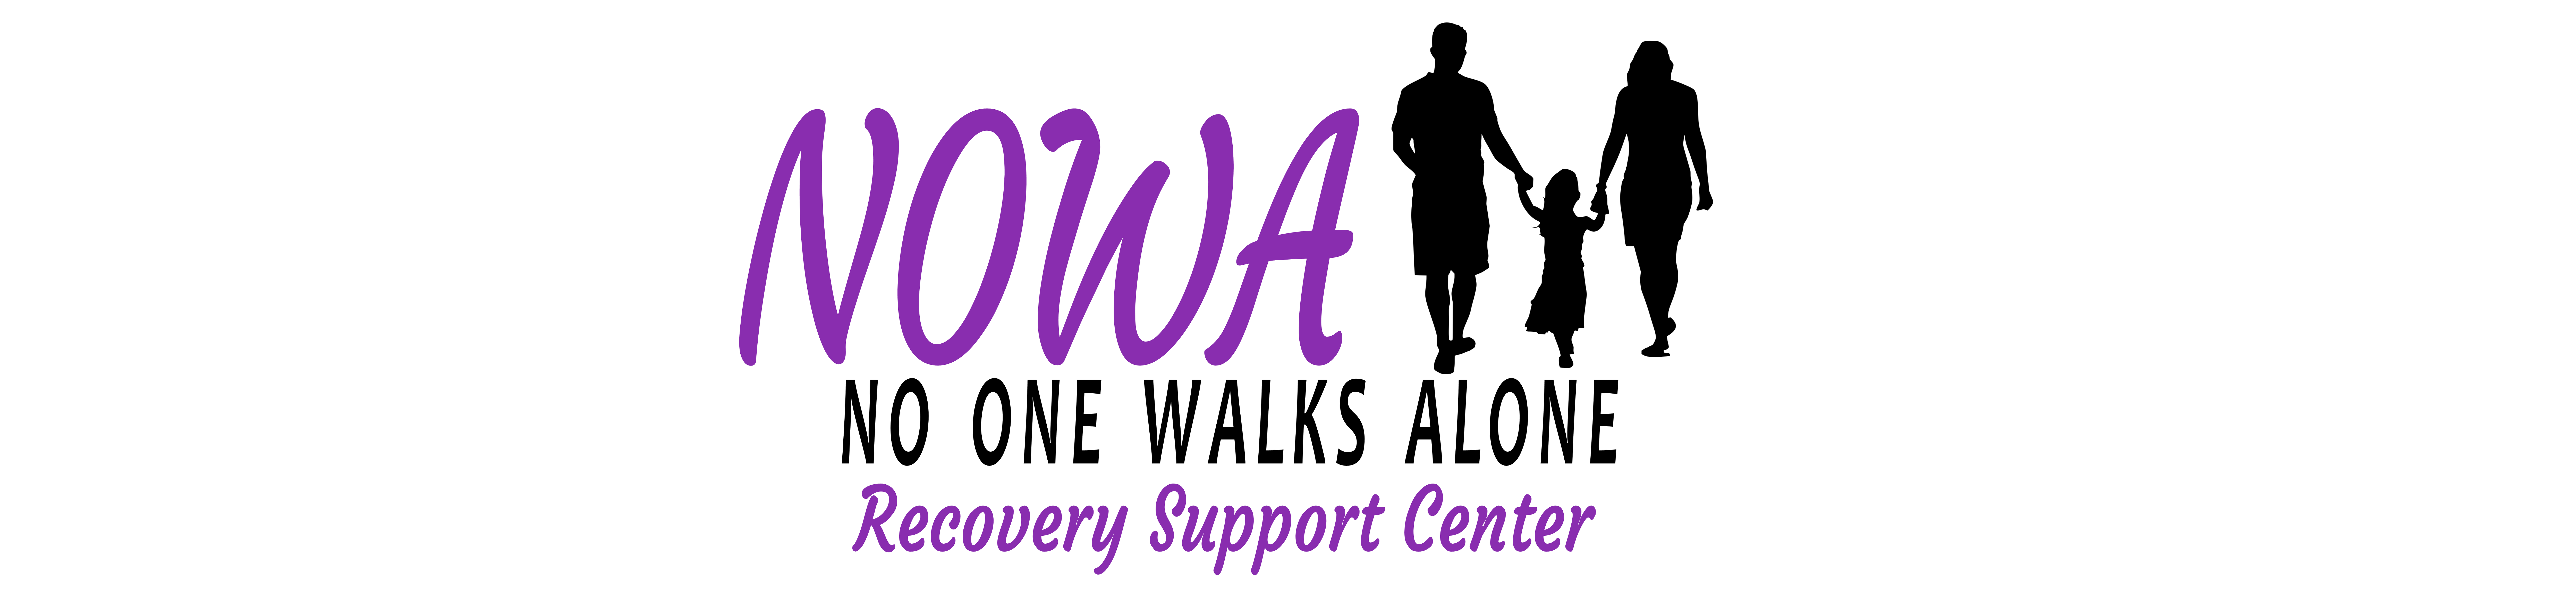 NOWA Recovery Support Center